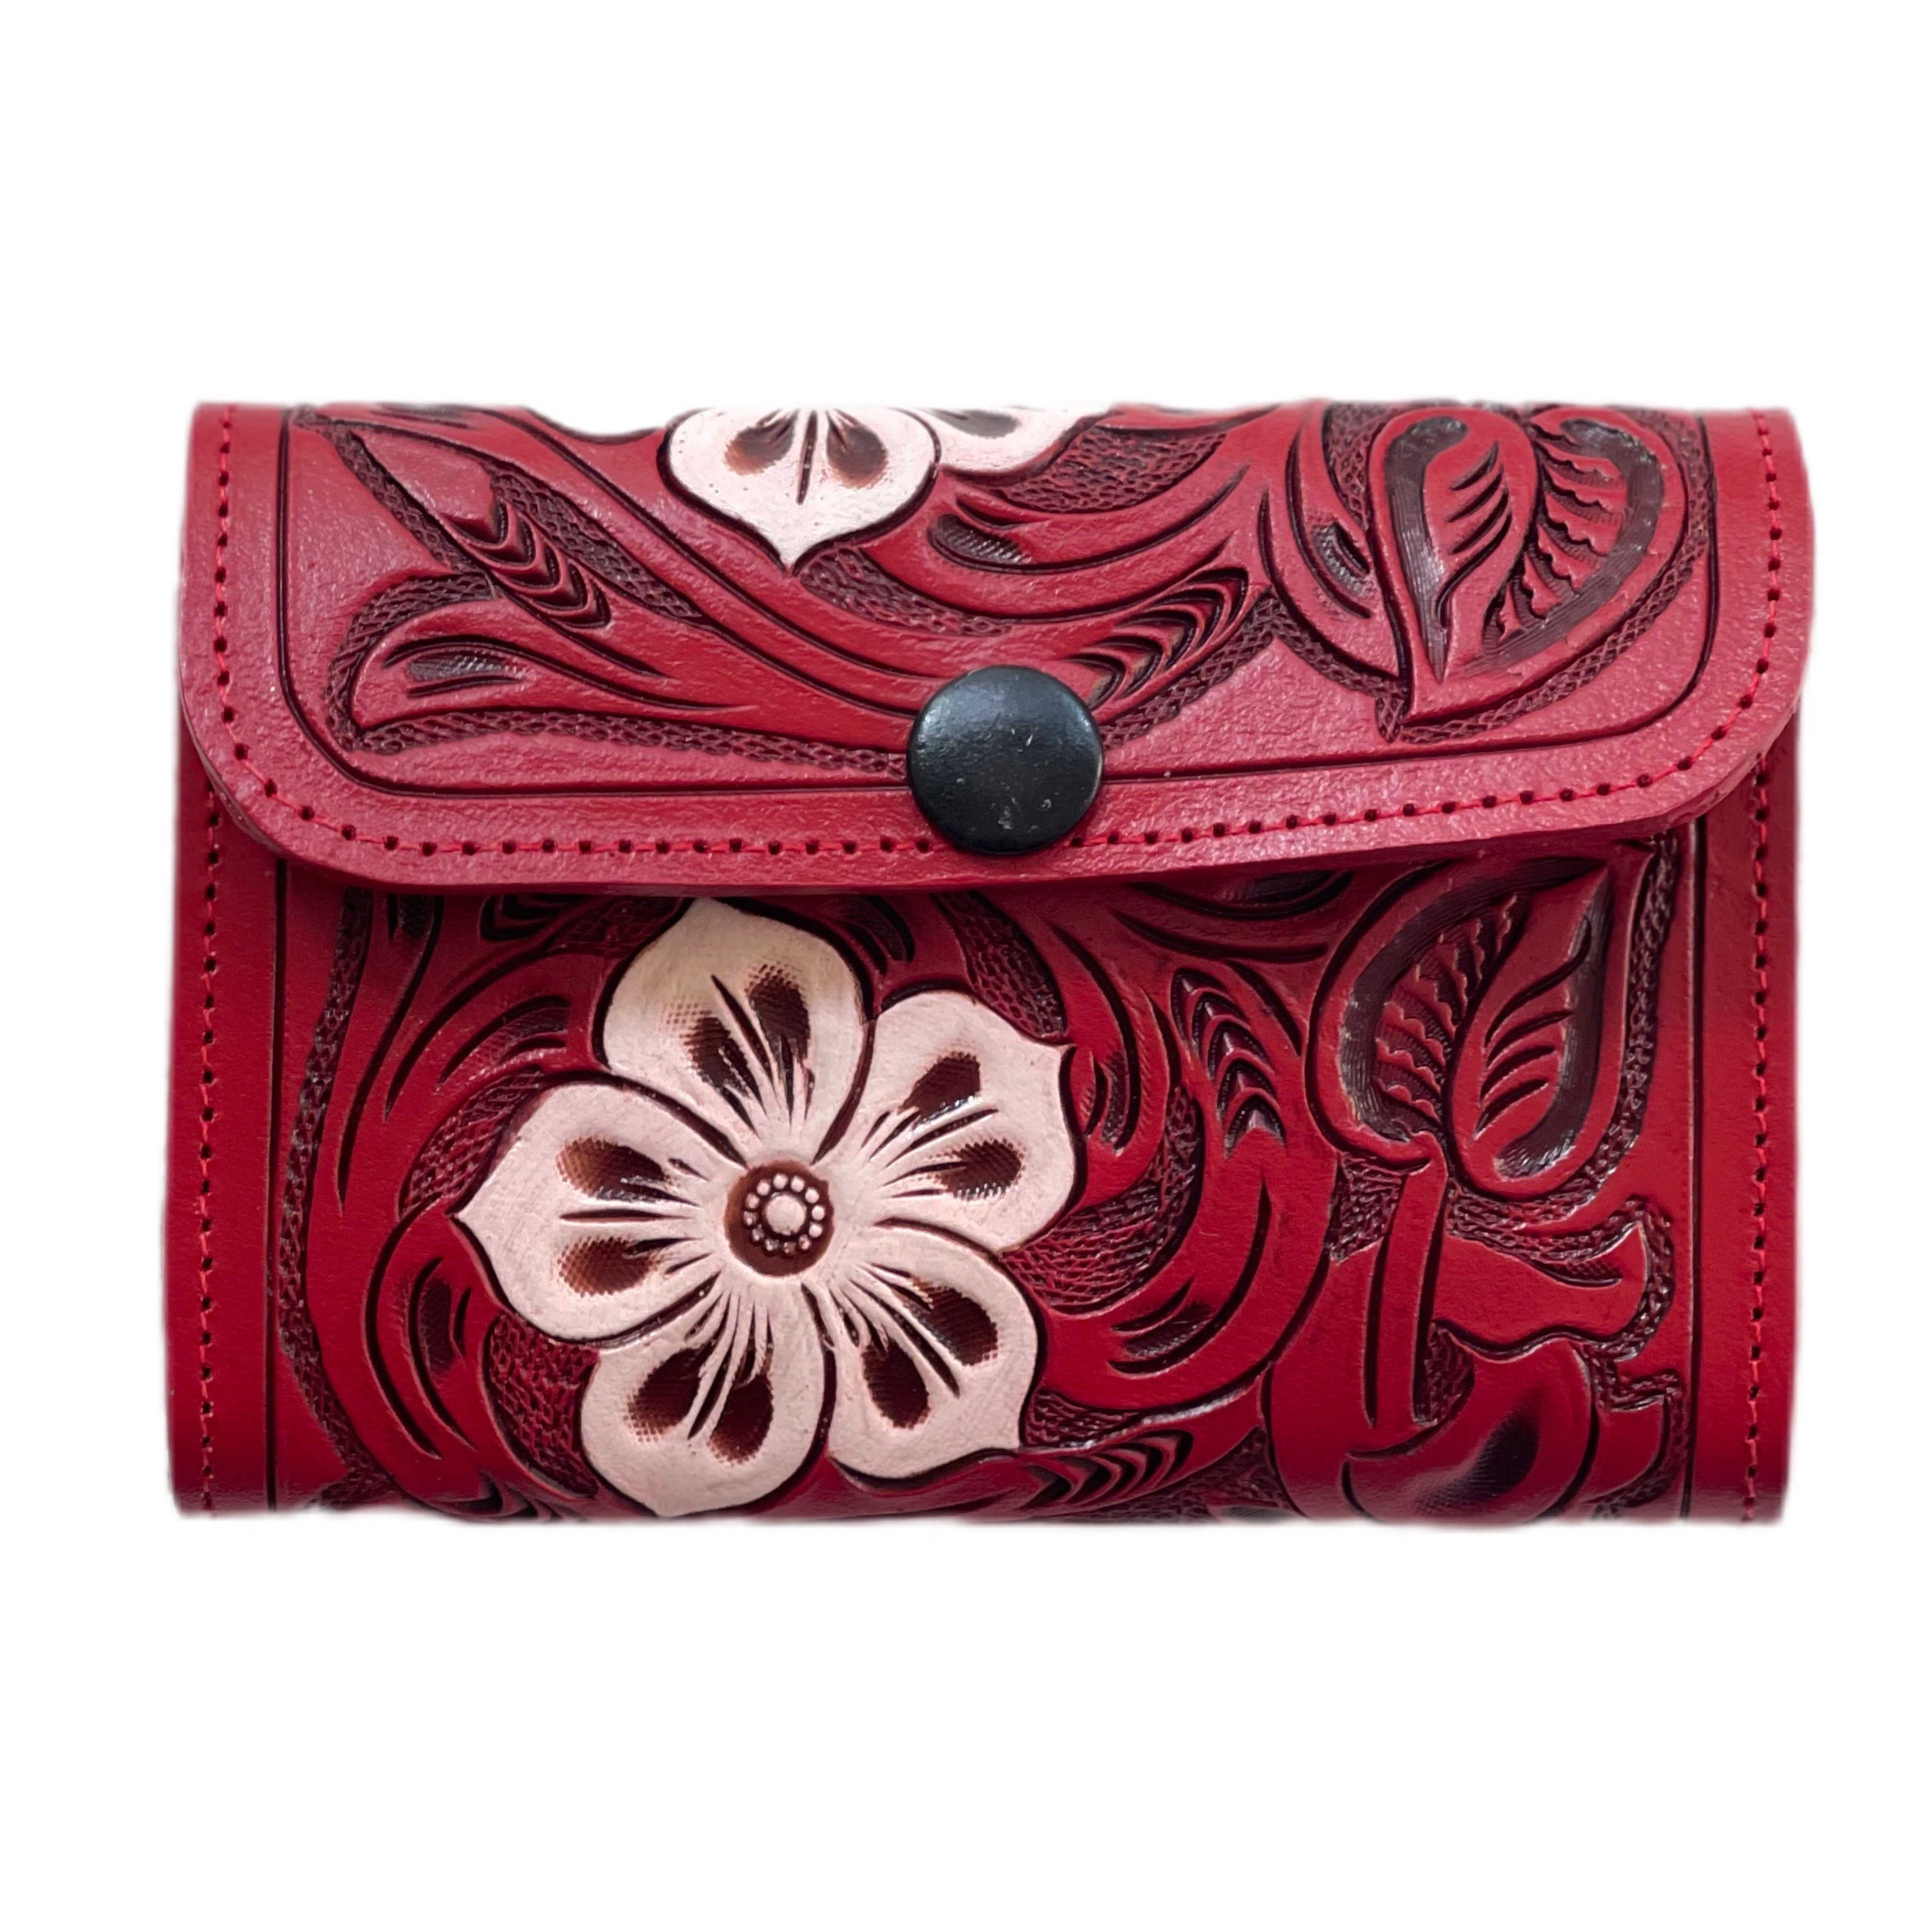 FLORAL WALLET - RED & WHITE